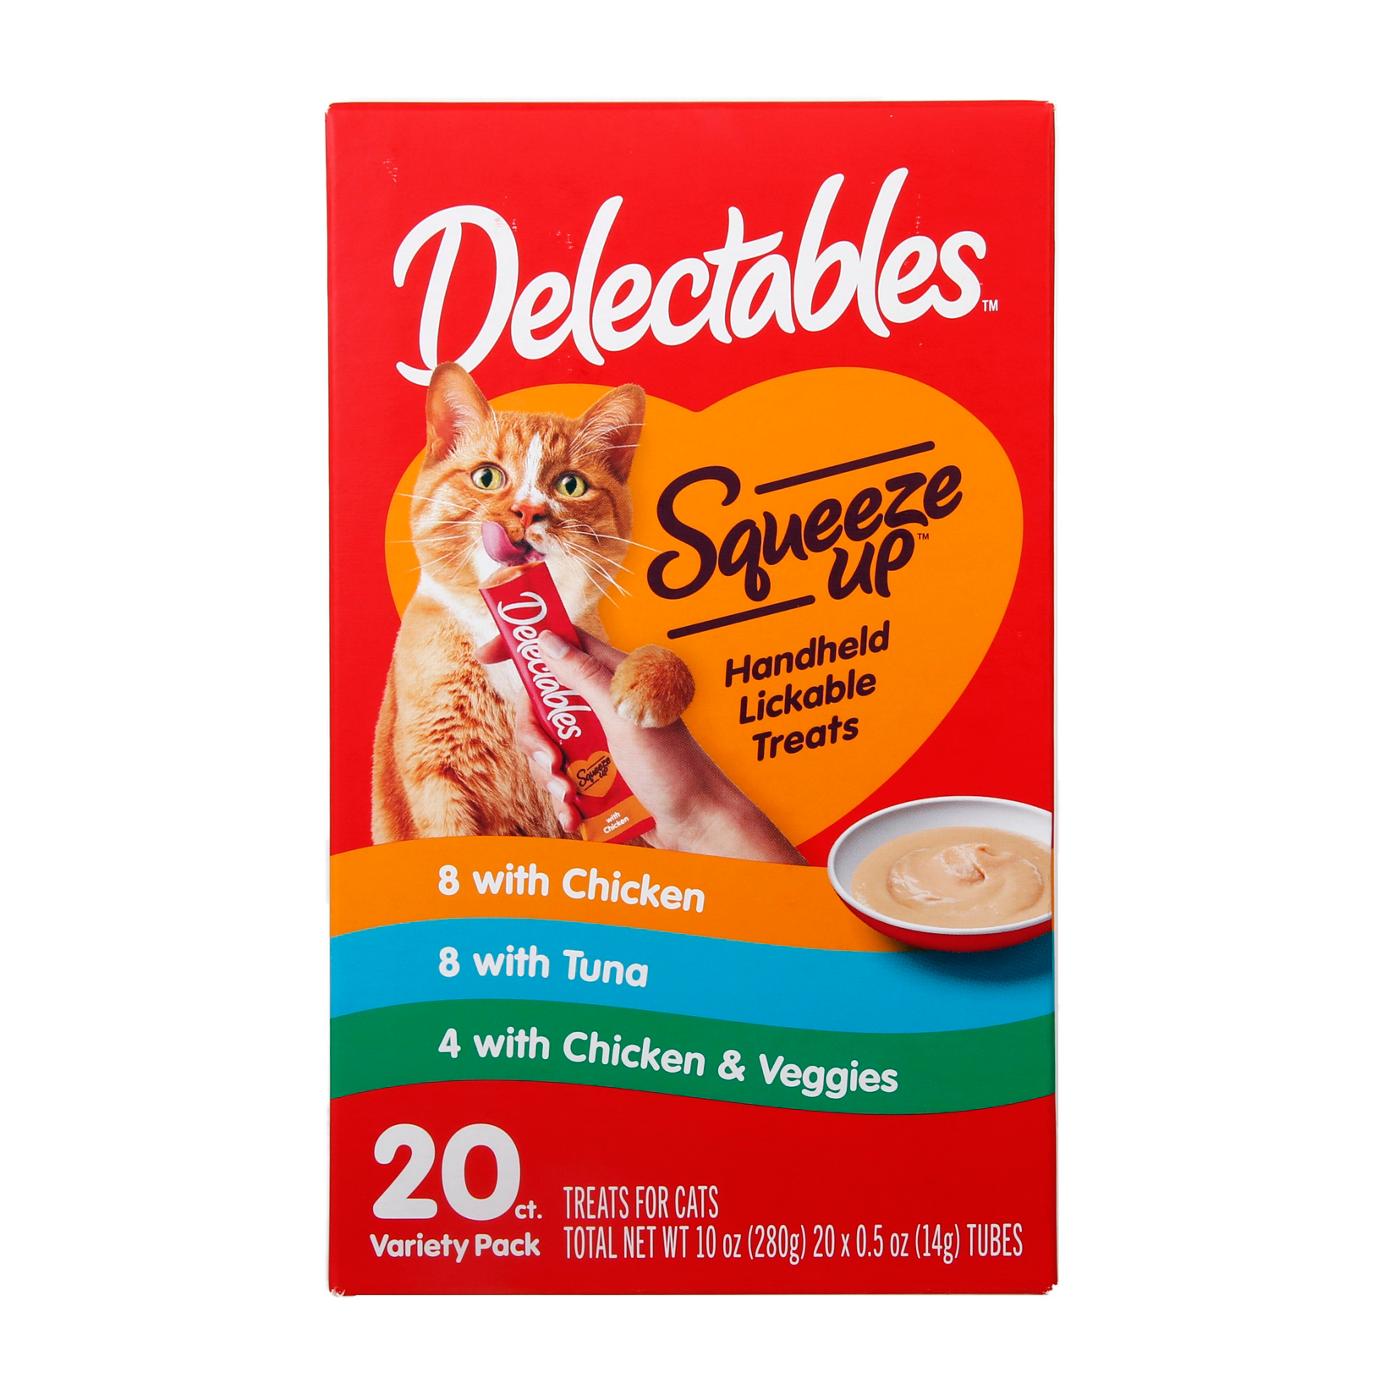 Hartz Delectables Squeeze Up Variety Pack Cat Treats; image 1 of 2